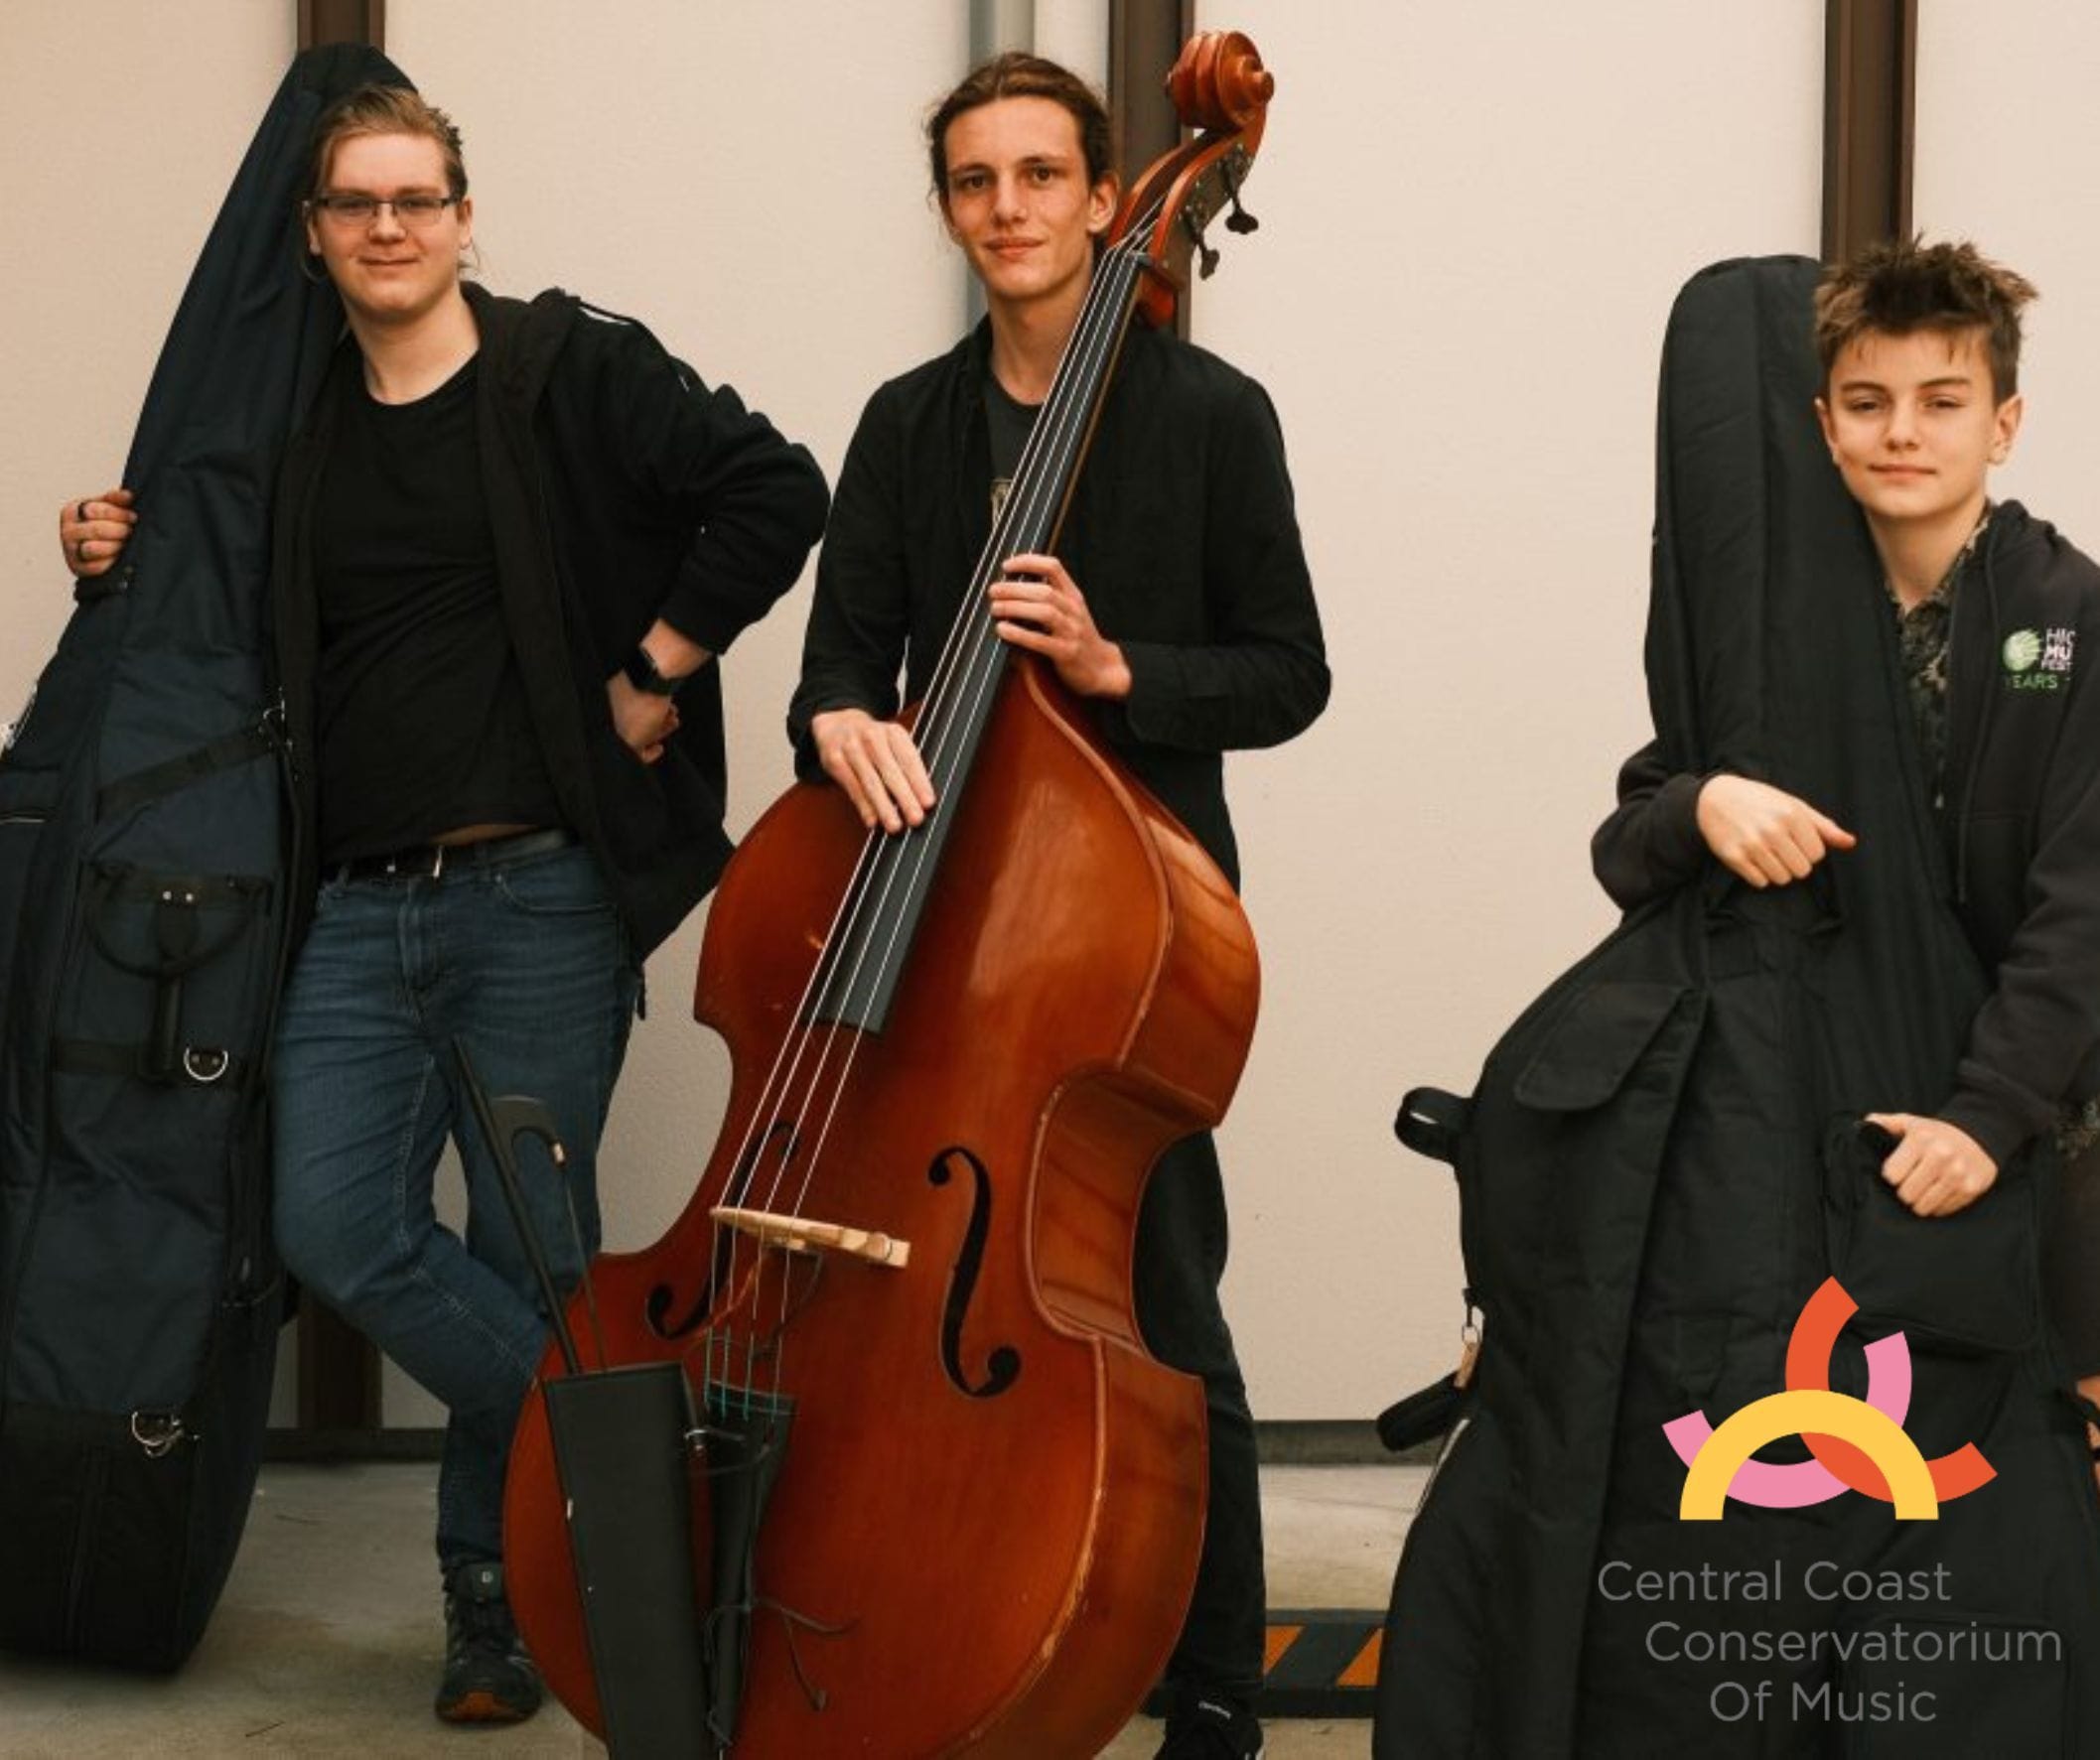 Empowering Young Musicians at Central Coast Conservatorium